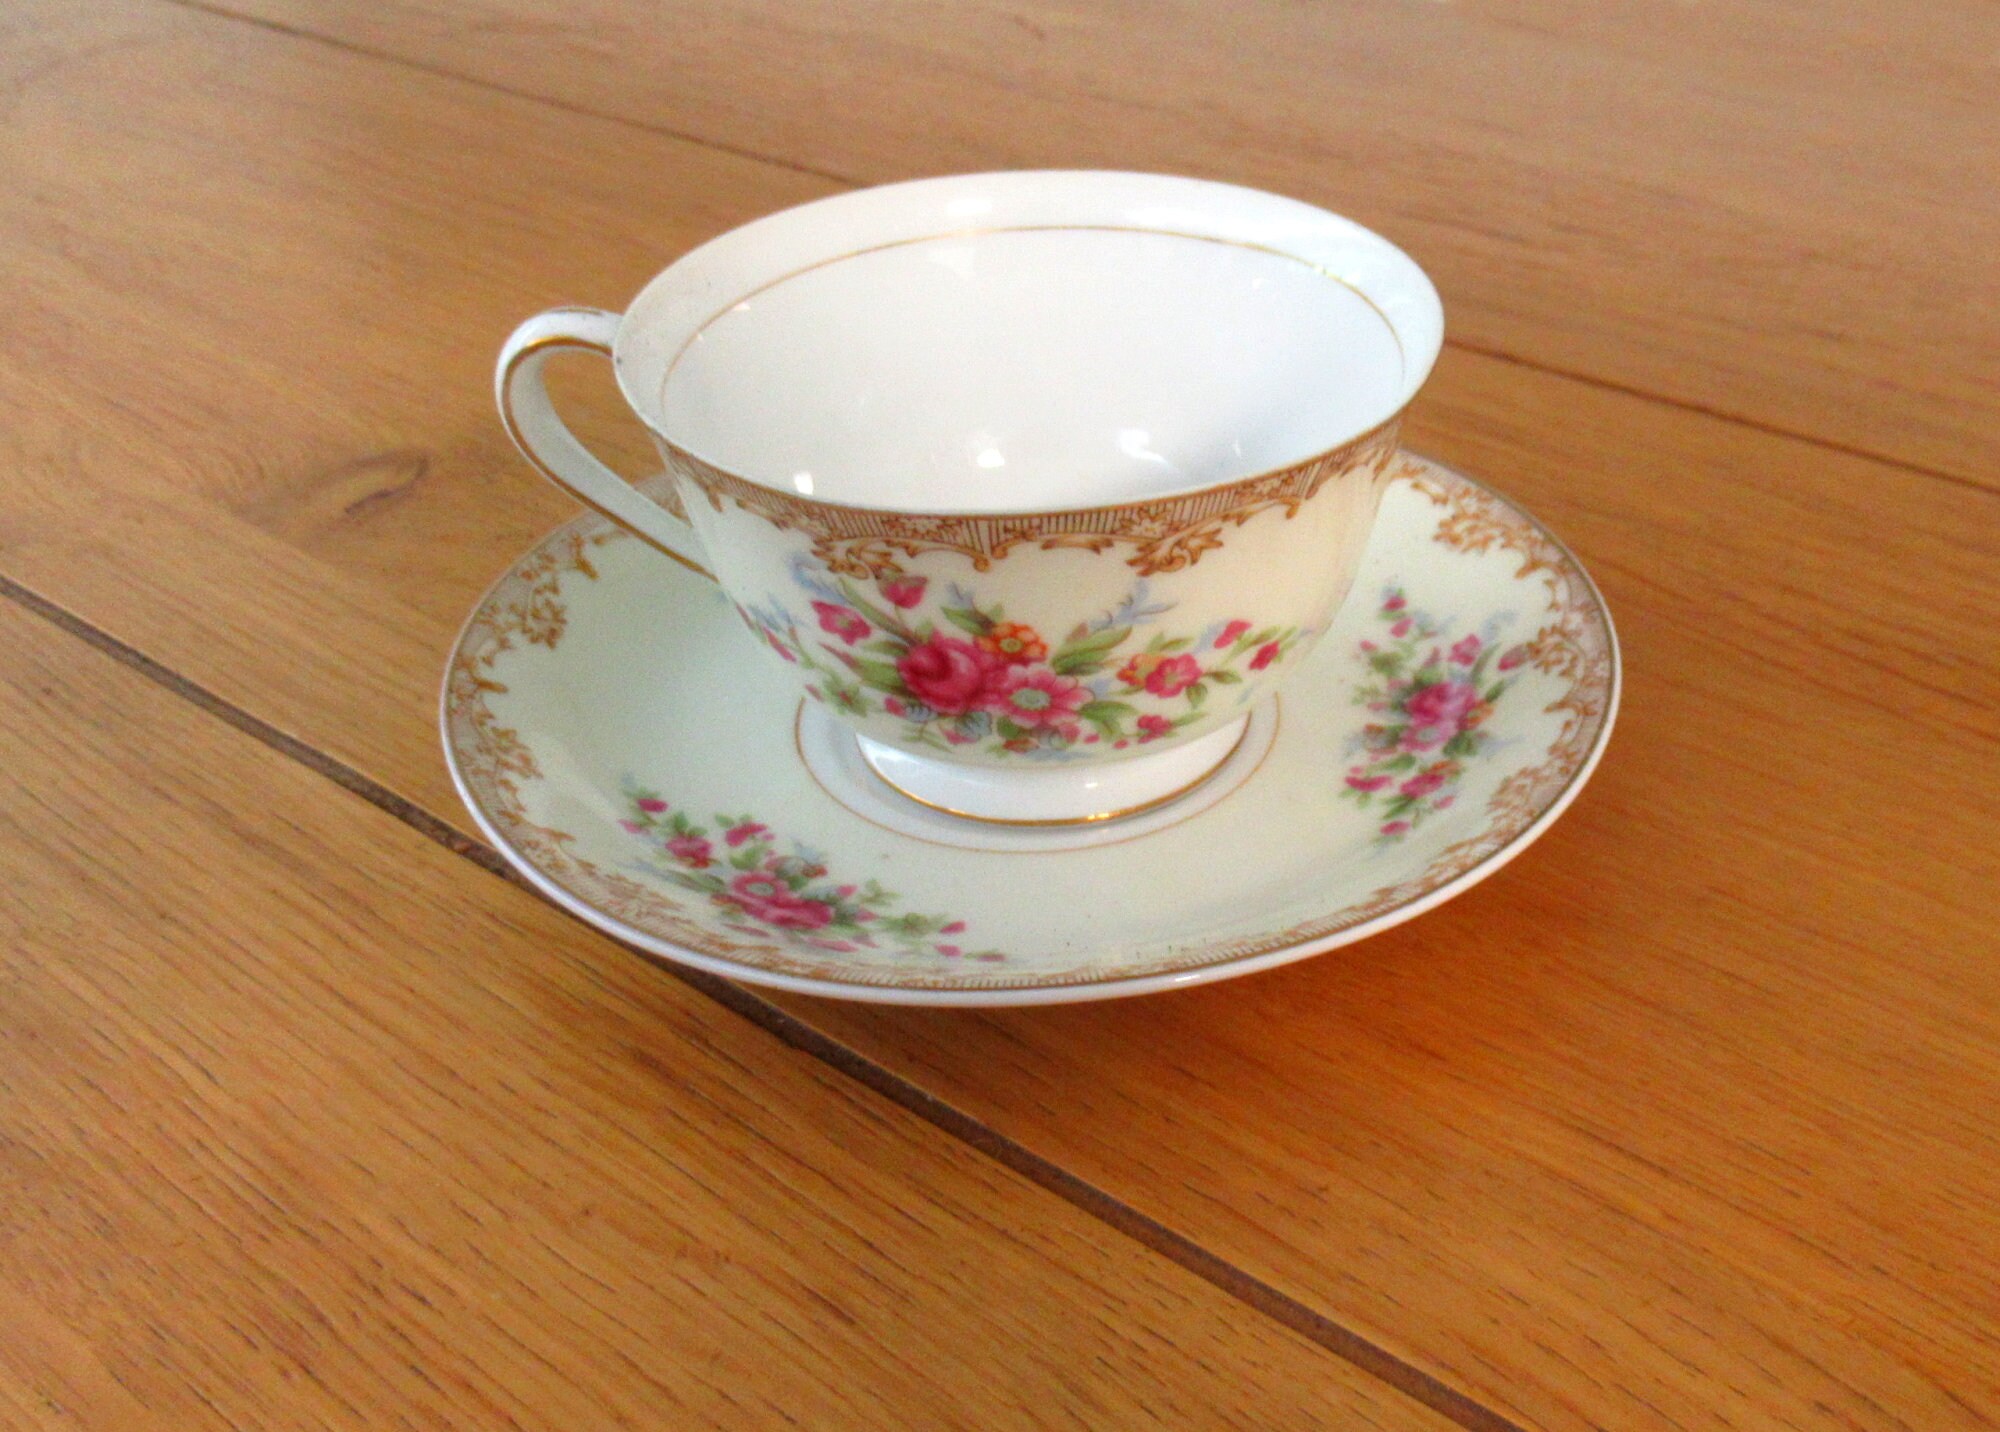 Vintage Yellow Floral Teacup and Saucer, Roses Tea Cup, Bone China ...